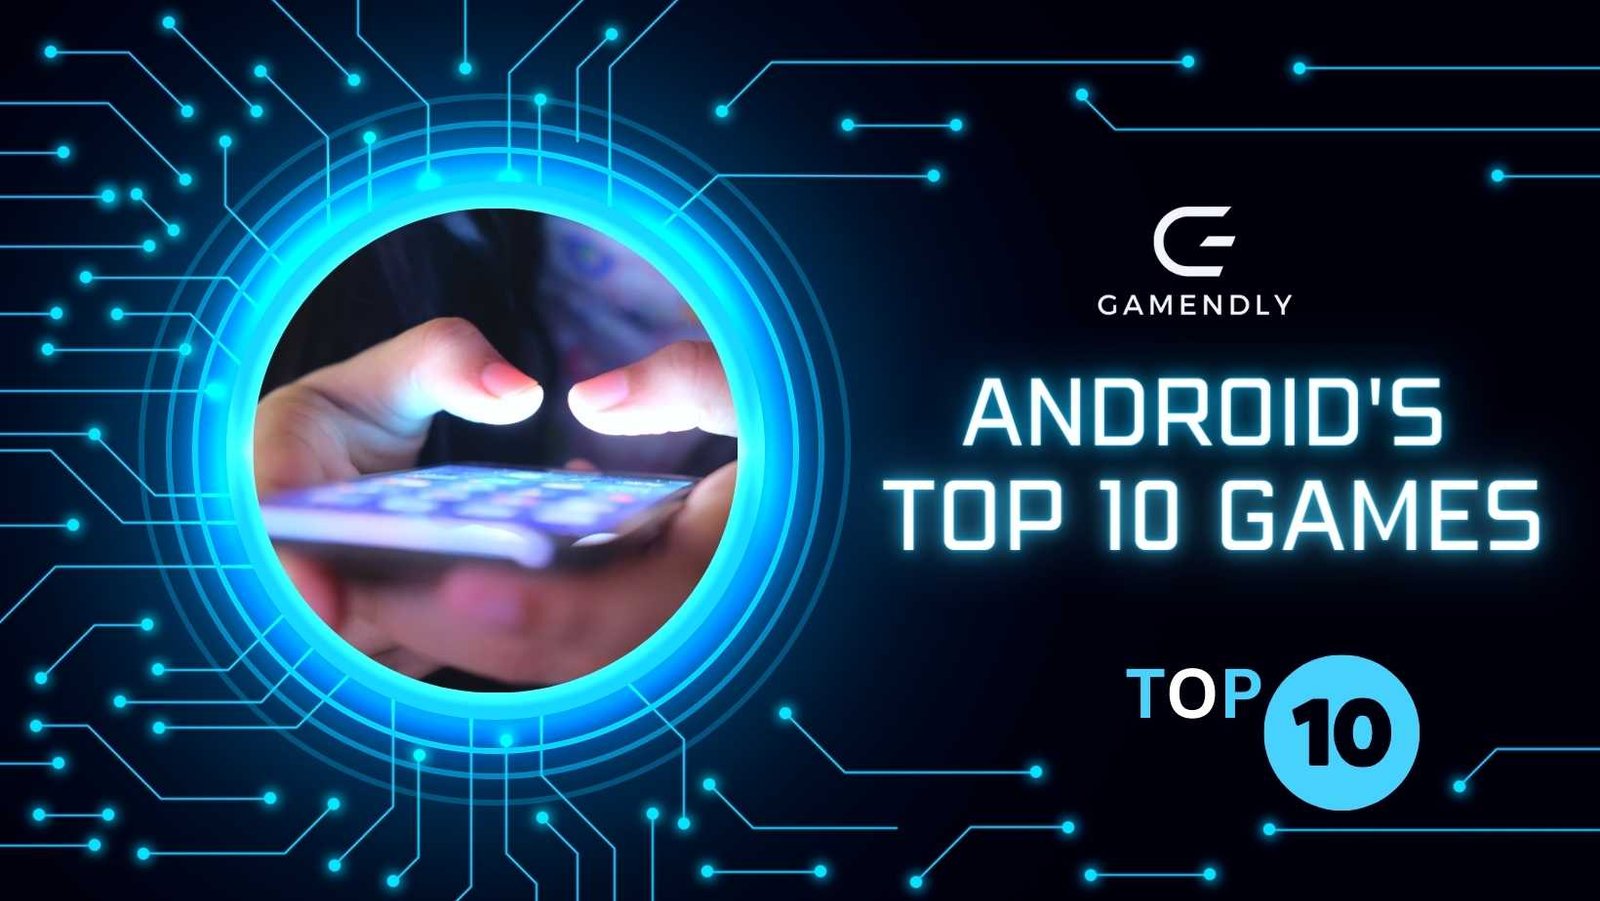 Top free games for android gamendly.com, the top free ones, most downloaded and free games.